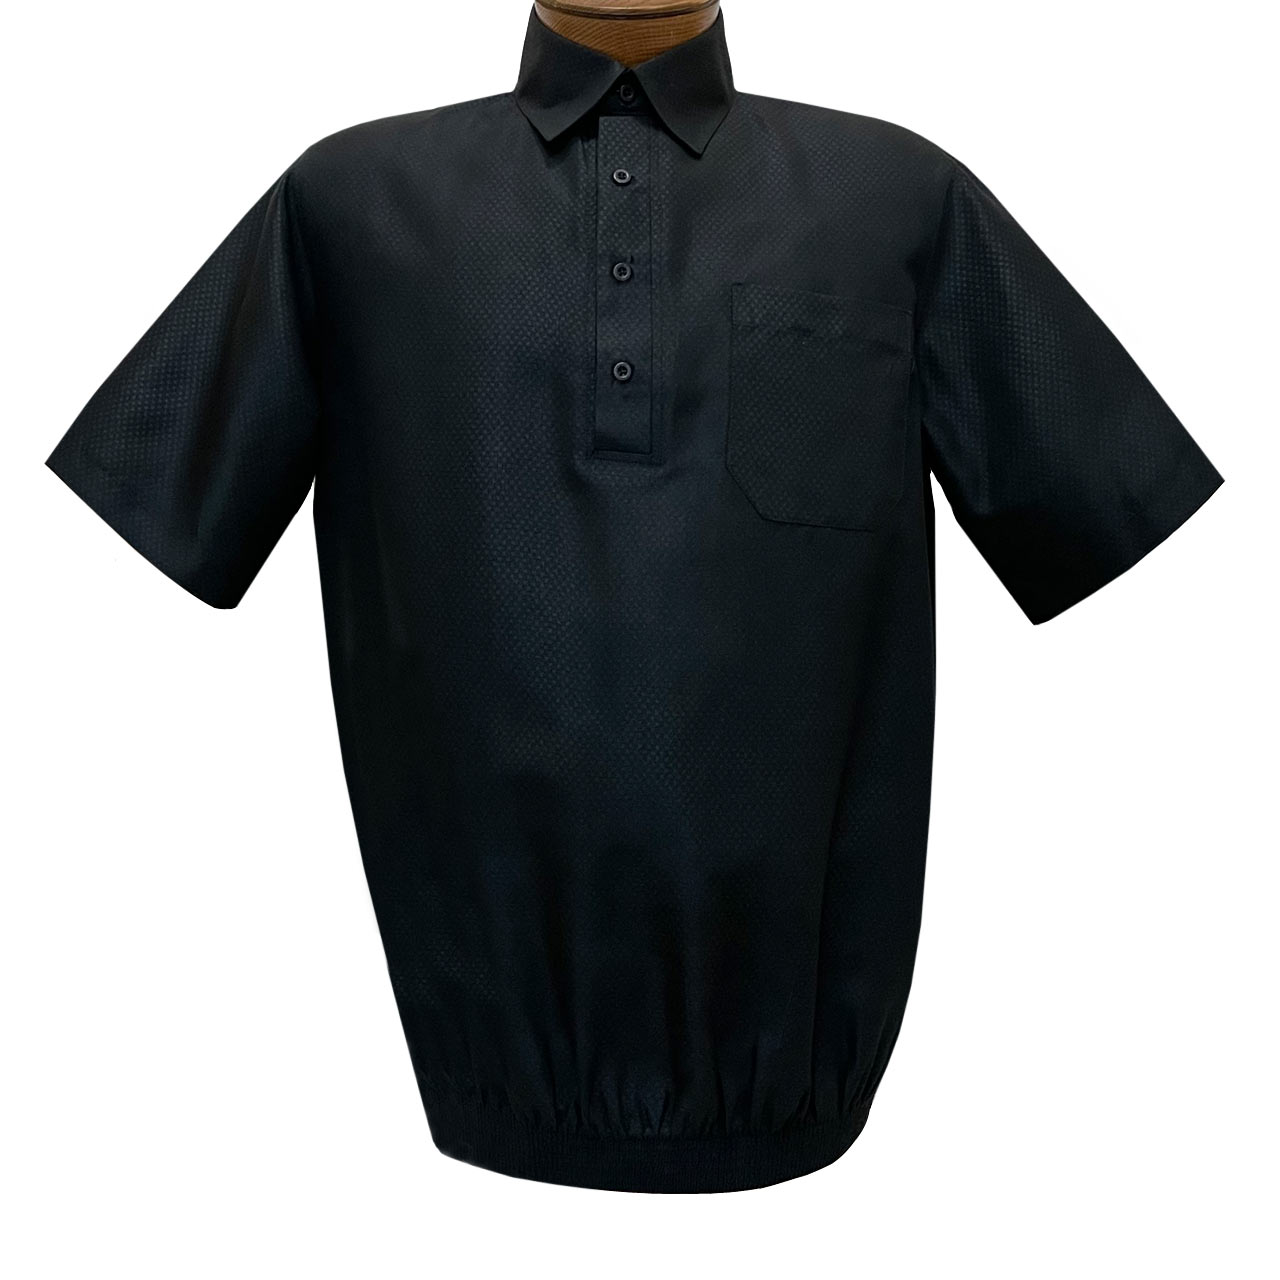 Men's Banded Bottom Short Sleeve Microfiber Shirt By Bassiri, Our Exclusive Handpicked Designs #S20265 Black